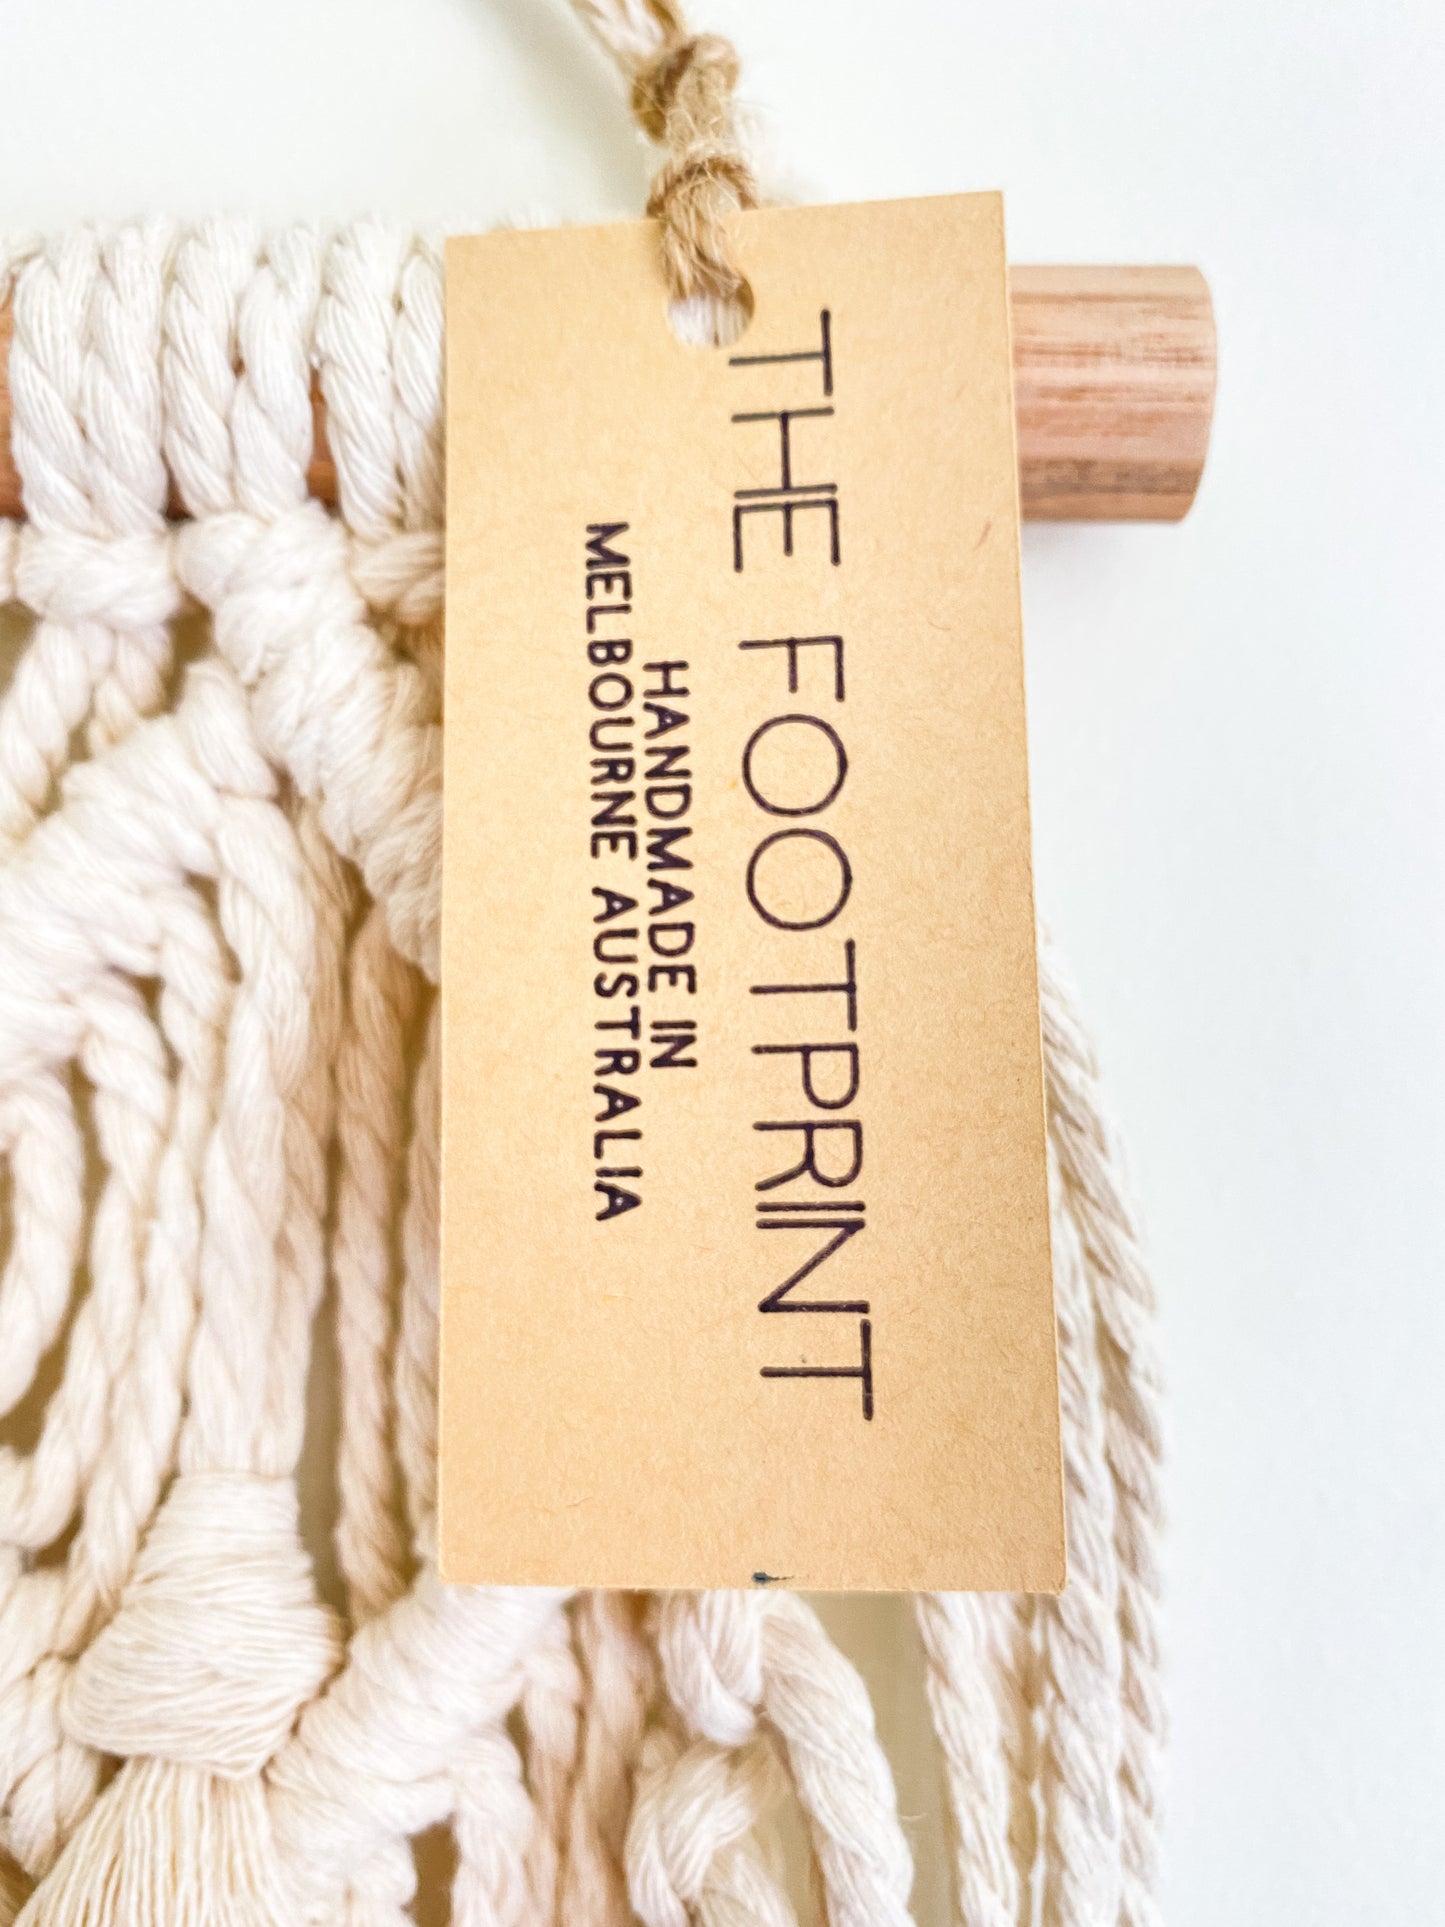 Closeup photo of a natural off white macrame wall hanging with the product tag on. Product tag reads The Footprint handmade in Melbourne, Australia